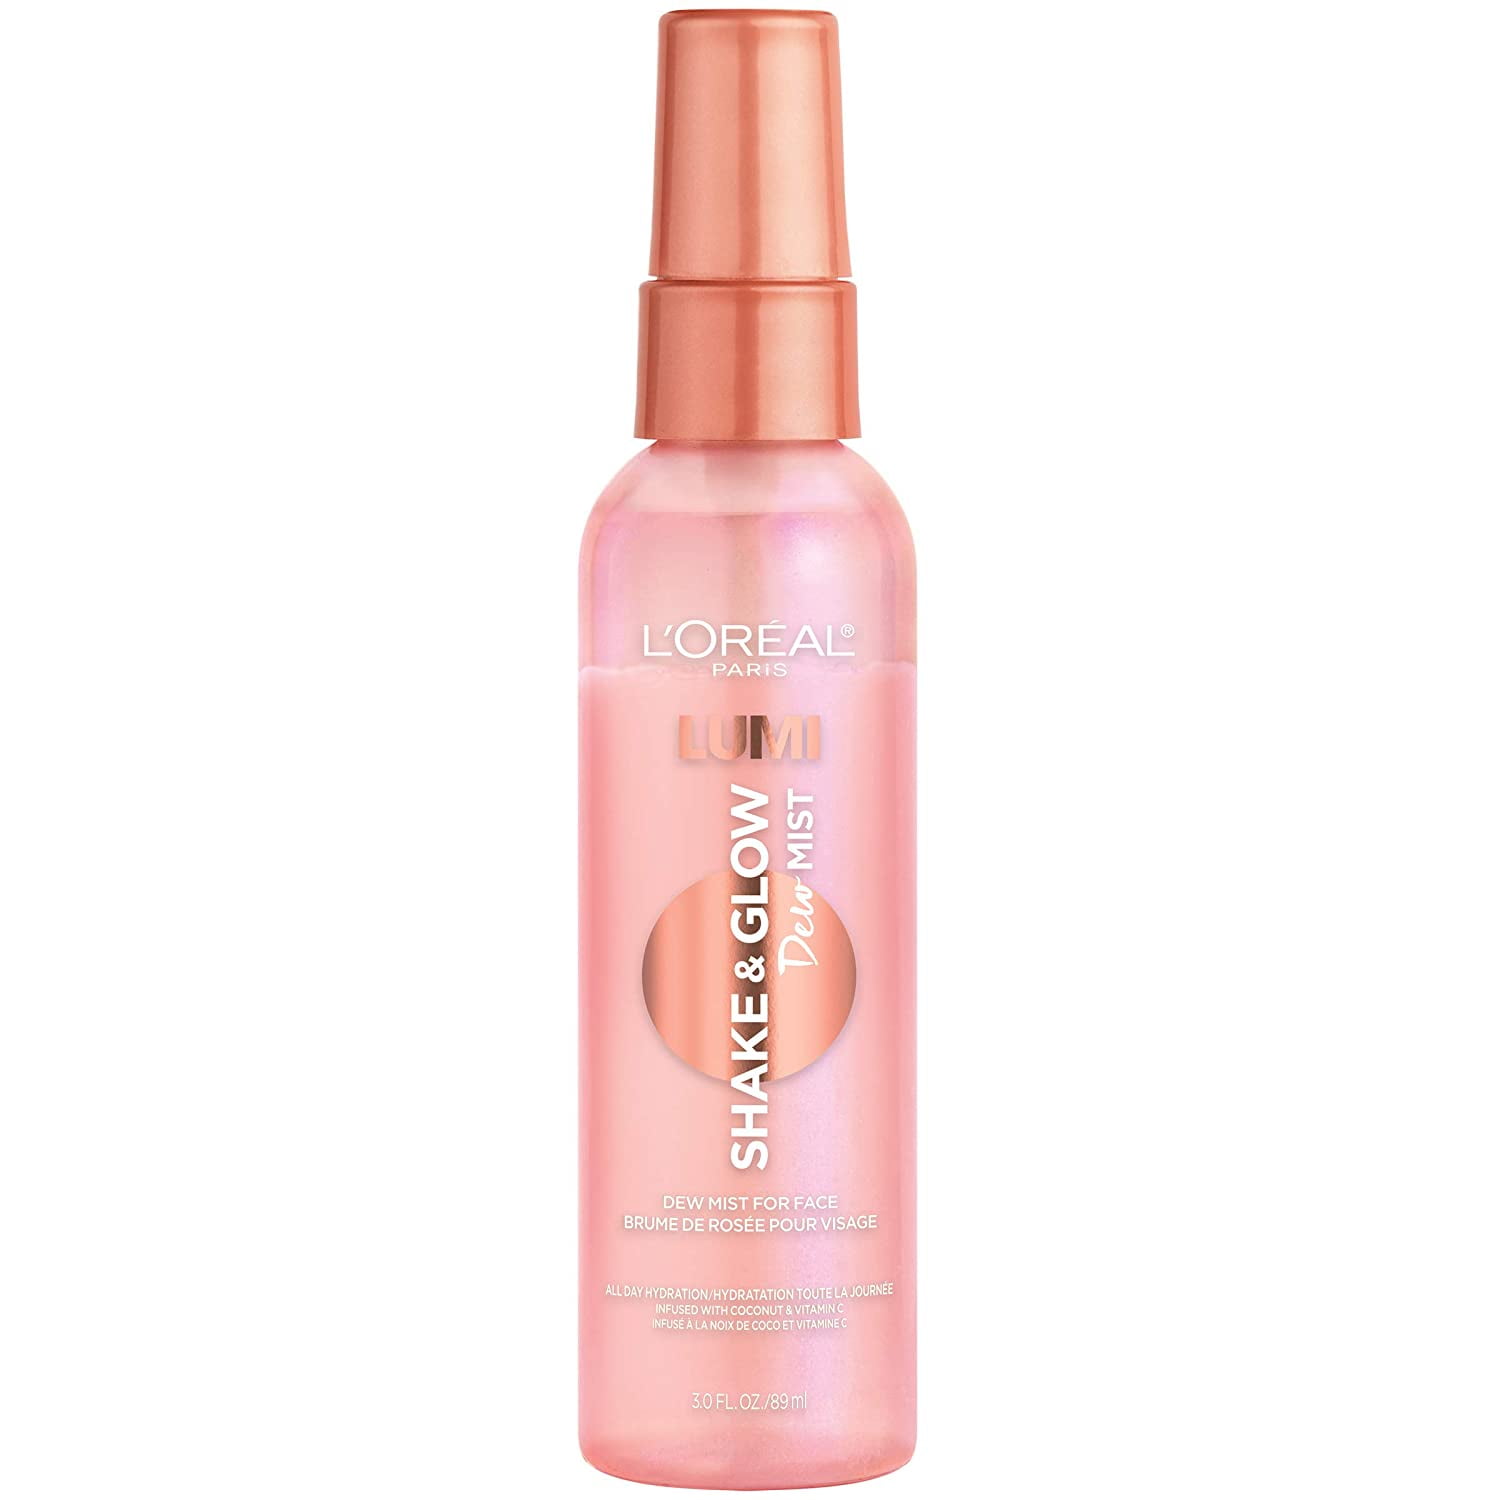 Andet Emigrere formel 2 Pack L'Oreal Paris Makeup LUMI Shake and Glow Dew Mist, Hydrating and  Soothing Face Mist, Prep and Set Makeup, Energizes Skin with a Healthy  Boost of Hydration, Natural Finish, 3 fl;